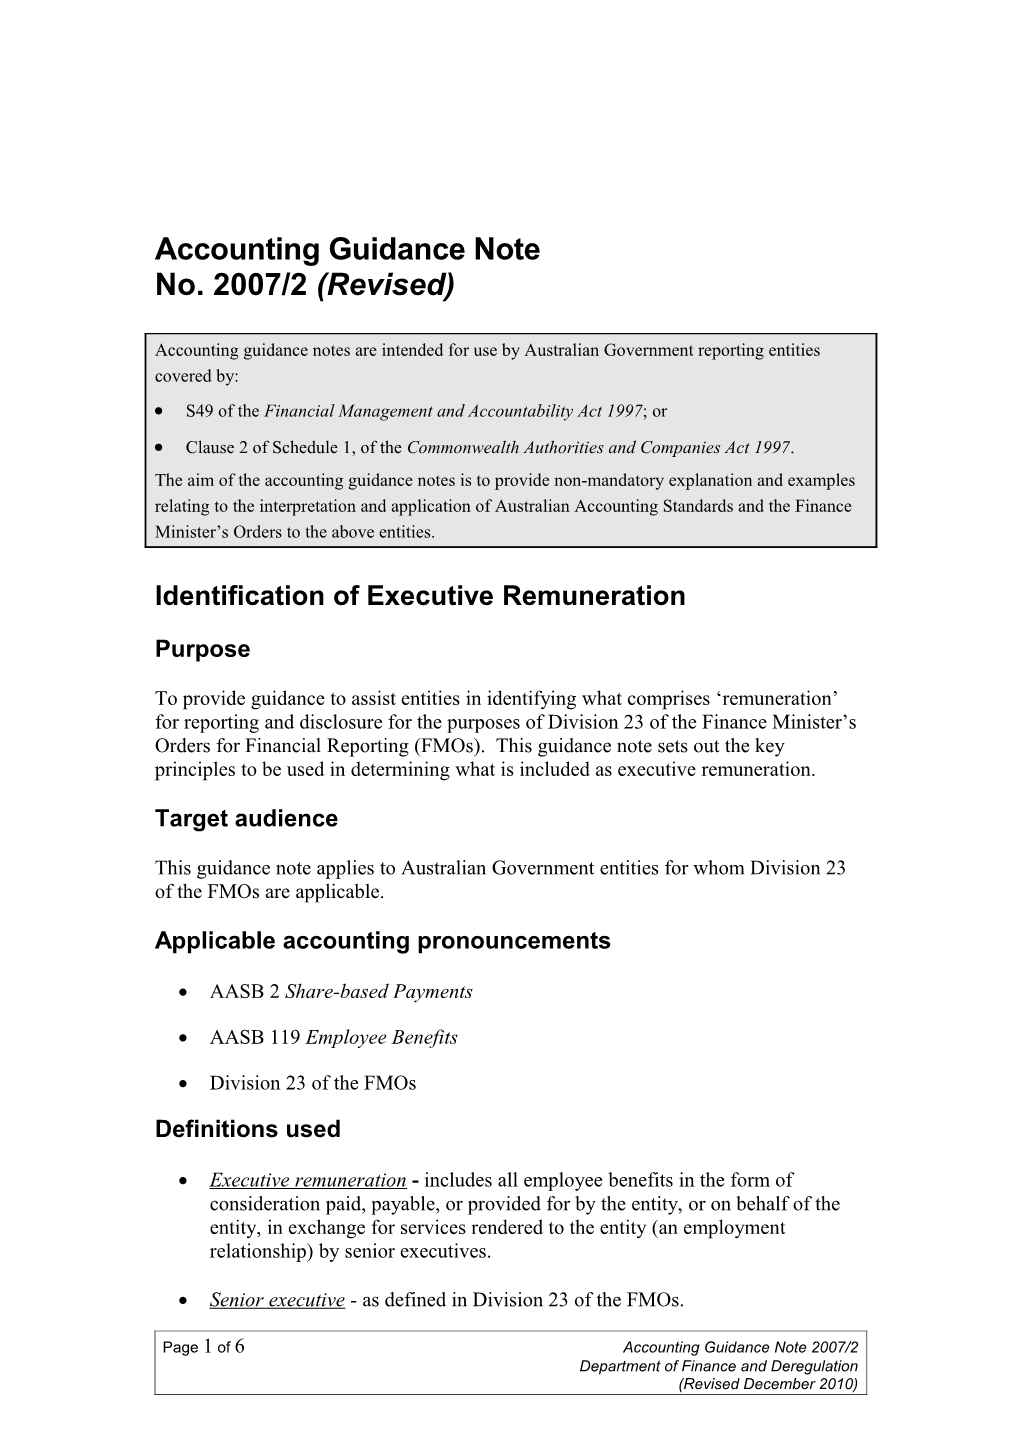 AGN 2007-2 (Revised) Identification of Executive Remuneration